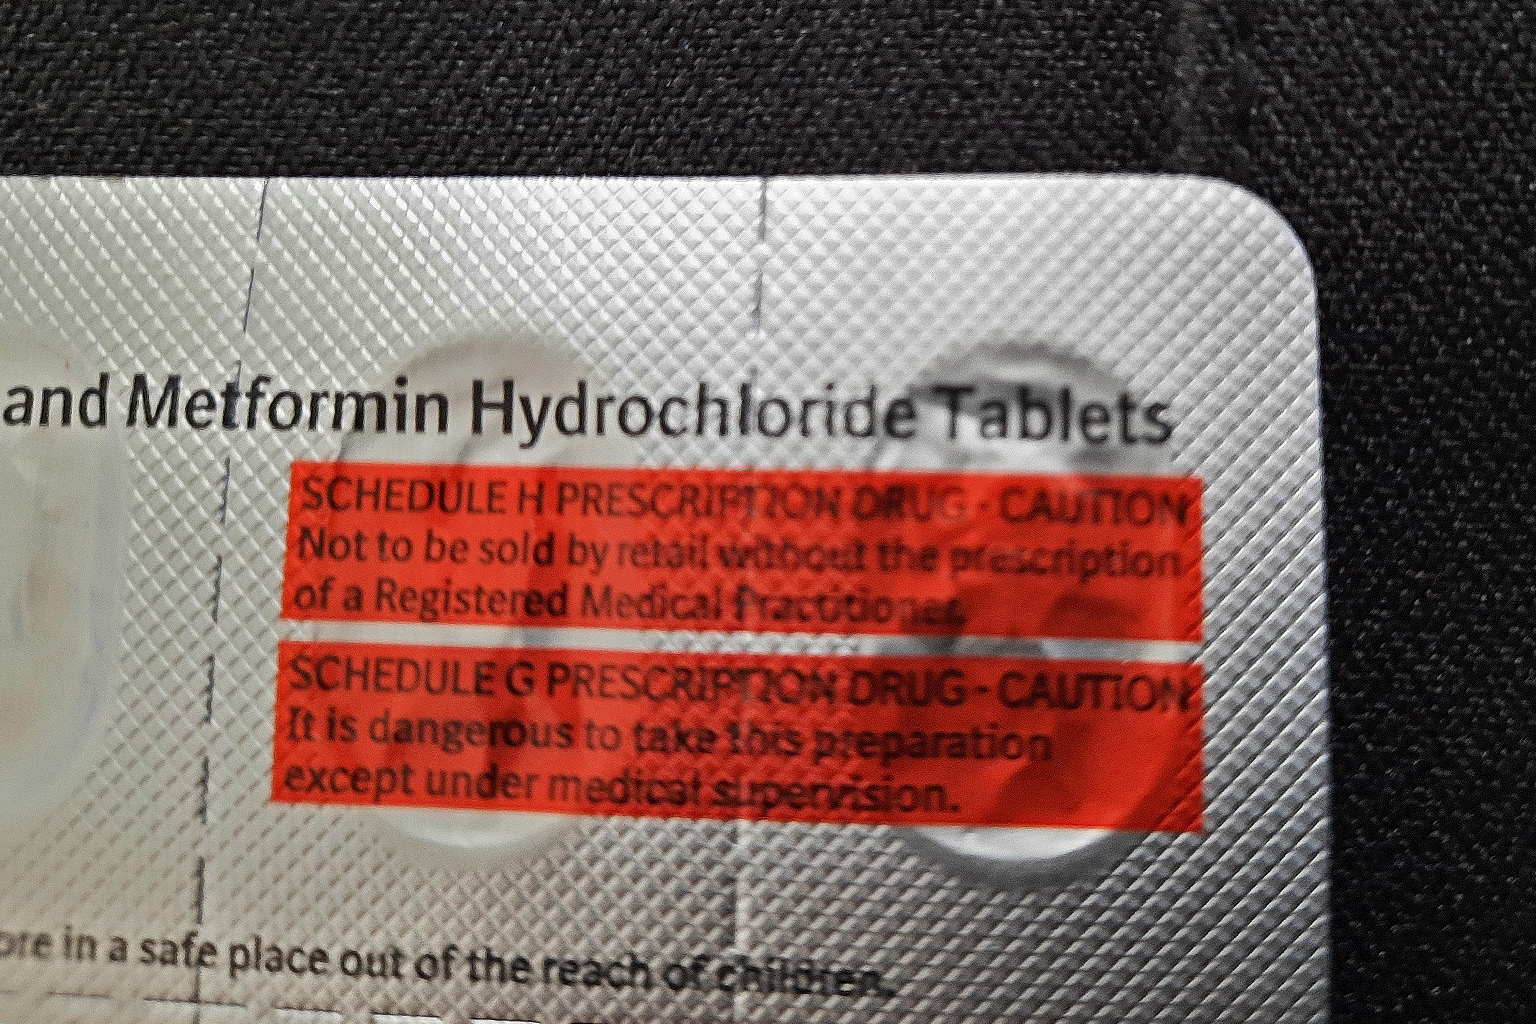 A bubble pack of metformin hydrochloride tablets.